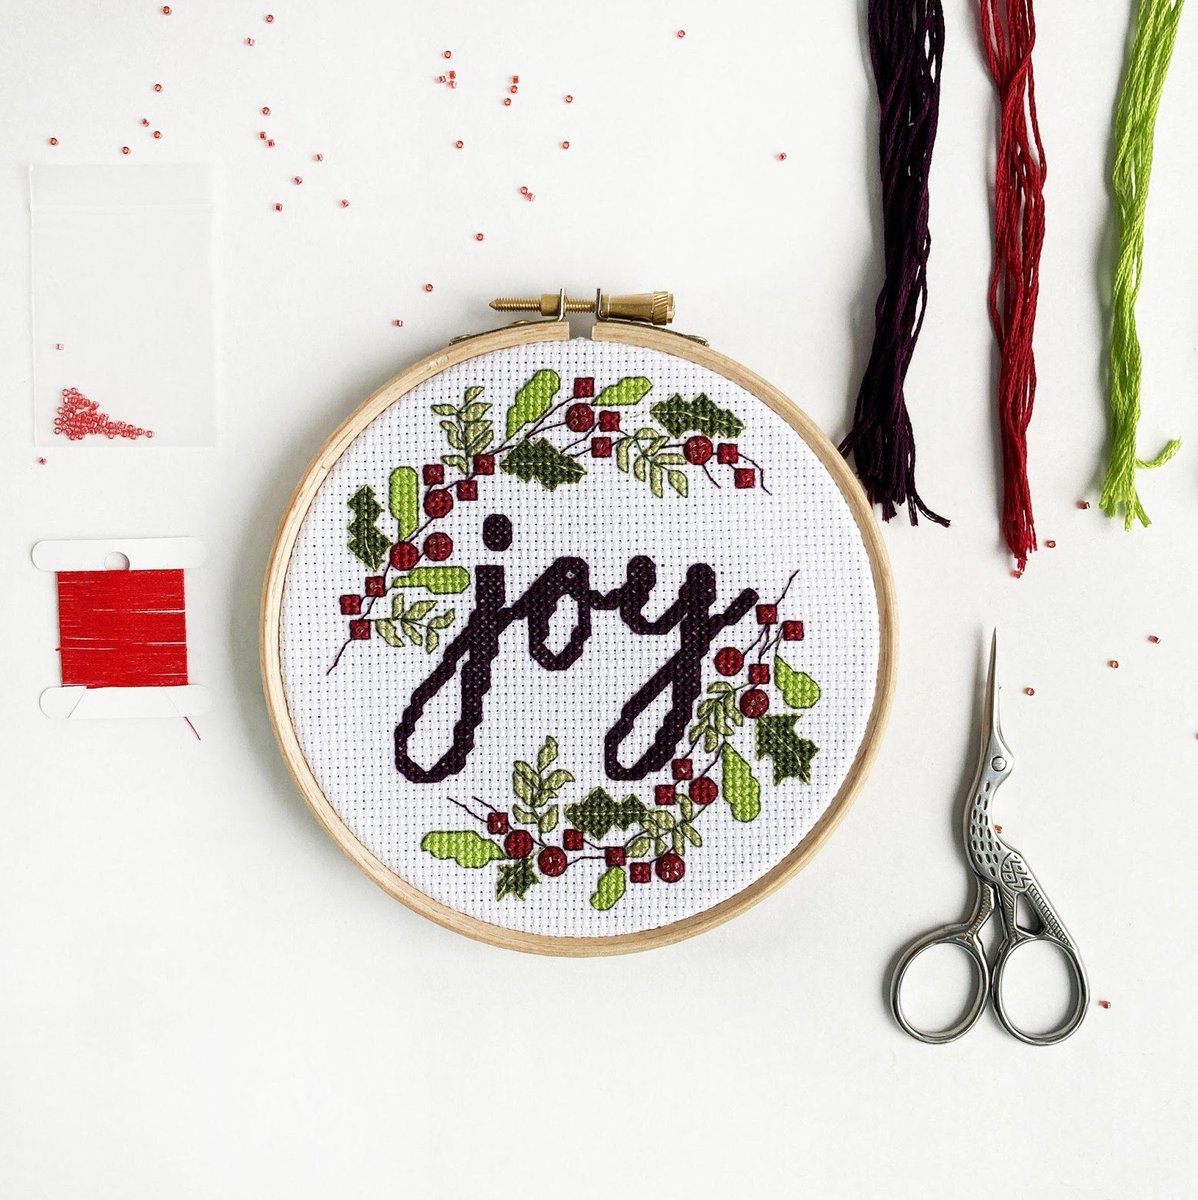 We've teamed up with @carpediememmie for our #SaveChristmasShopLocal campaign and she's published a gift guide packed full of Leicestershire locals and we love it! 🎄

This lovely cross stitch kit is by @KirstyF_Design

bddy.me/3oxk0dc